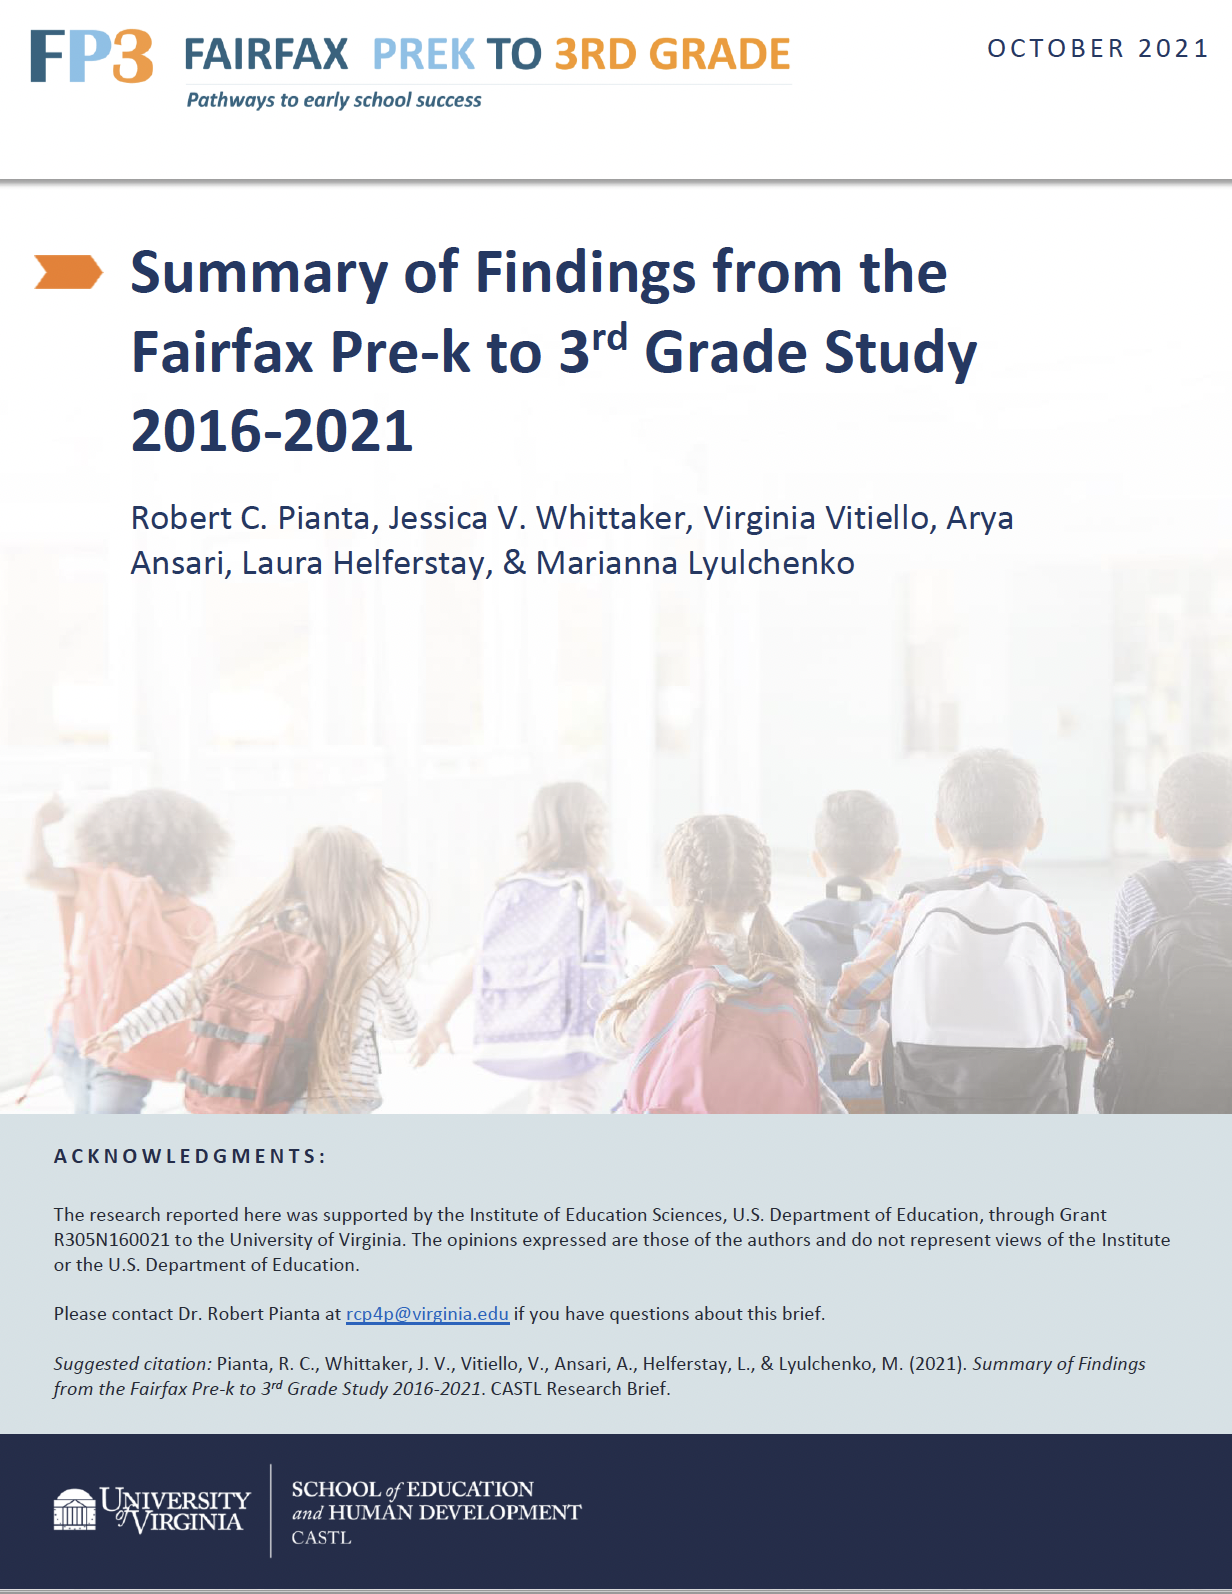 Research Brief Cover for Fairfax Pre-k to 3rd Grade Study 2016-2021 - Findings Summary